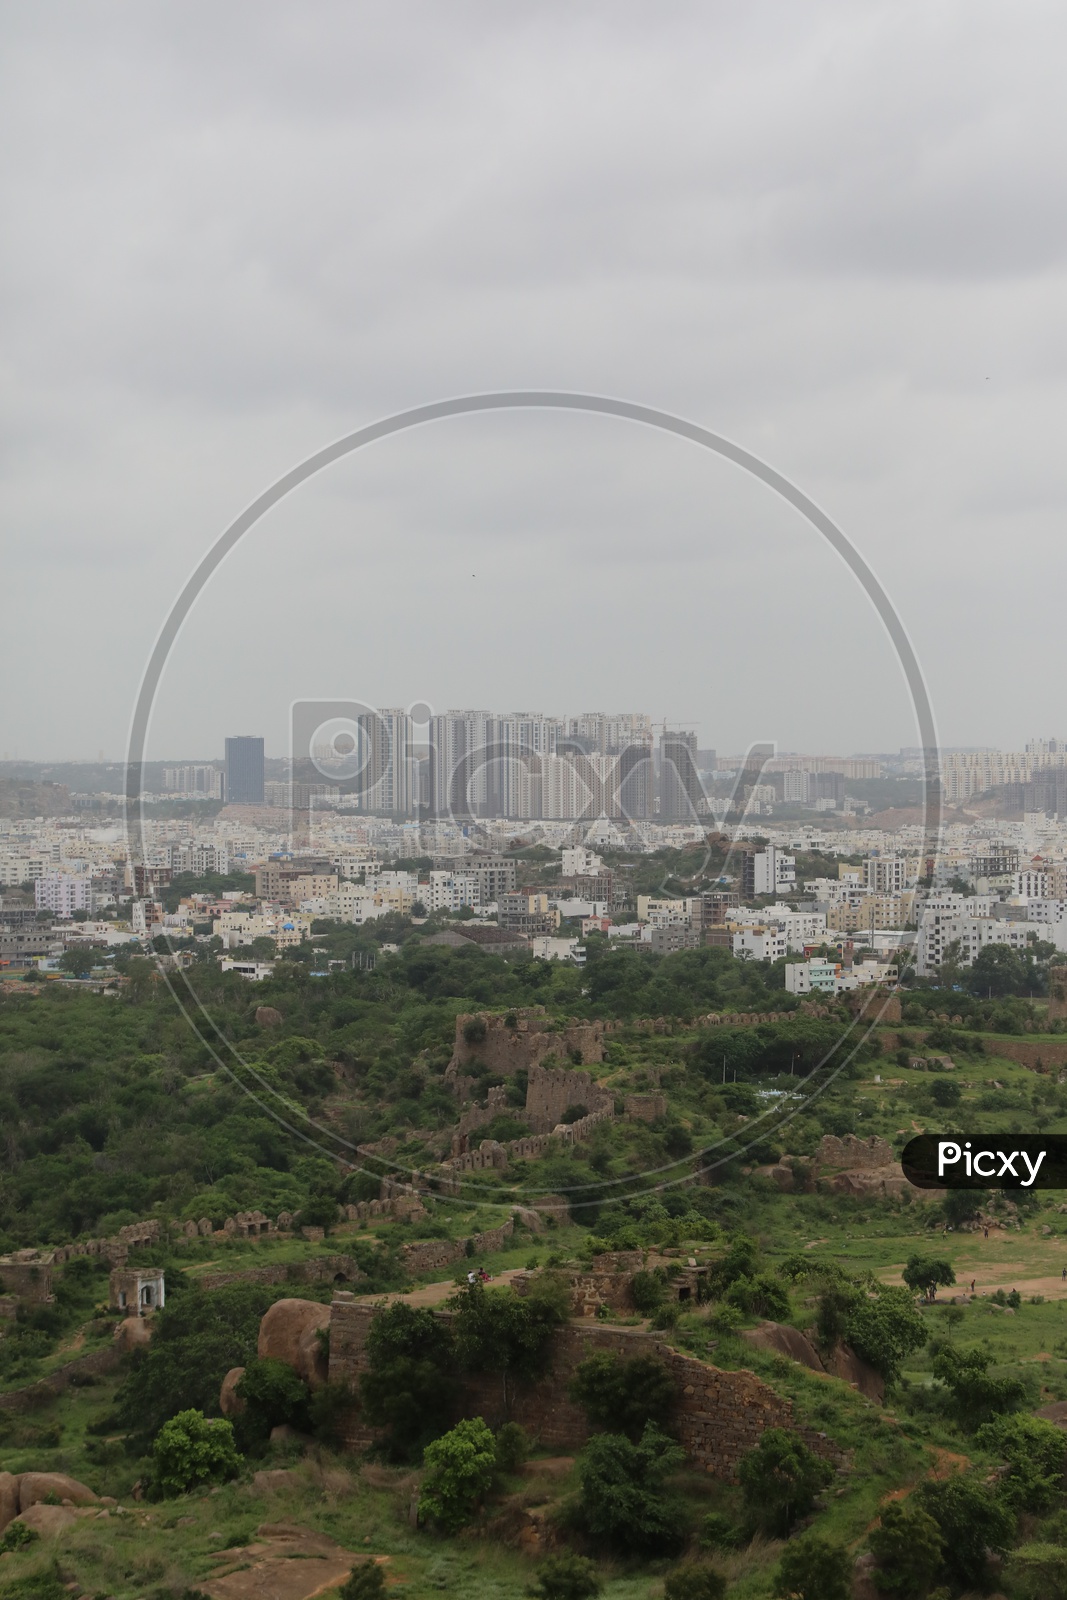 City view from Top of Golconda Fort / Hyderabad City from Golconda Fort